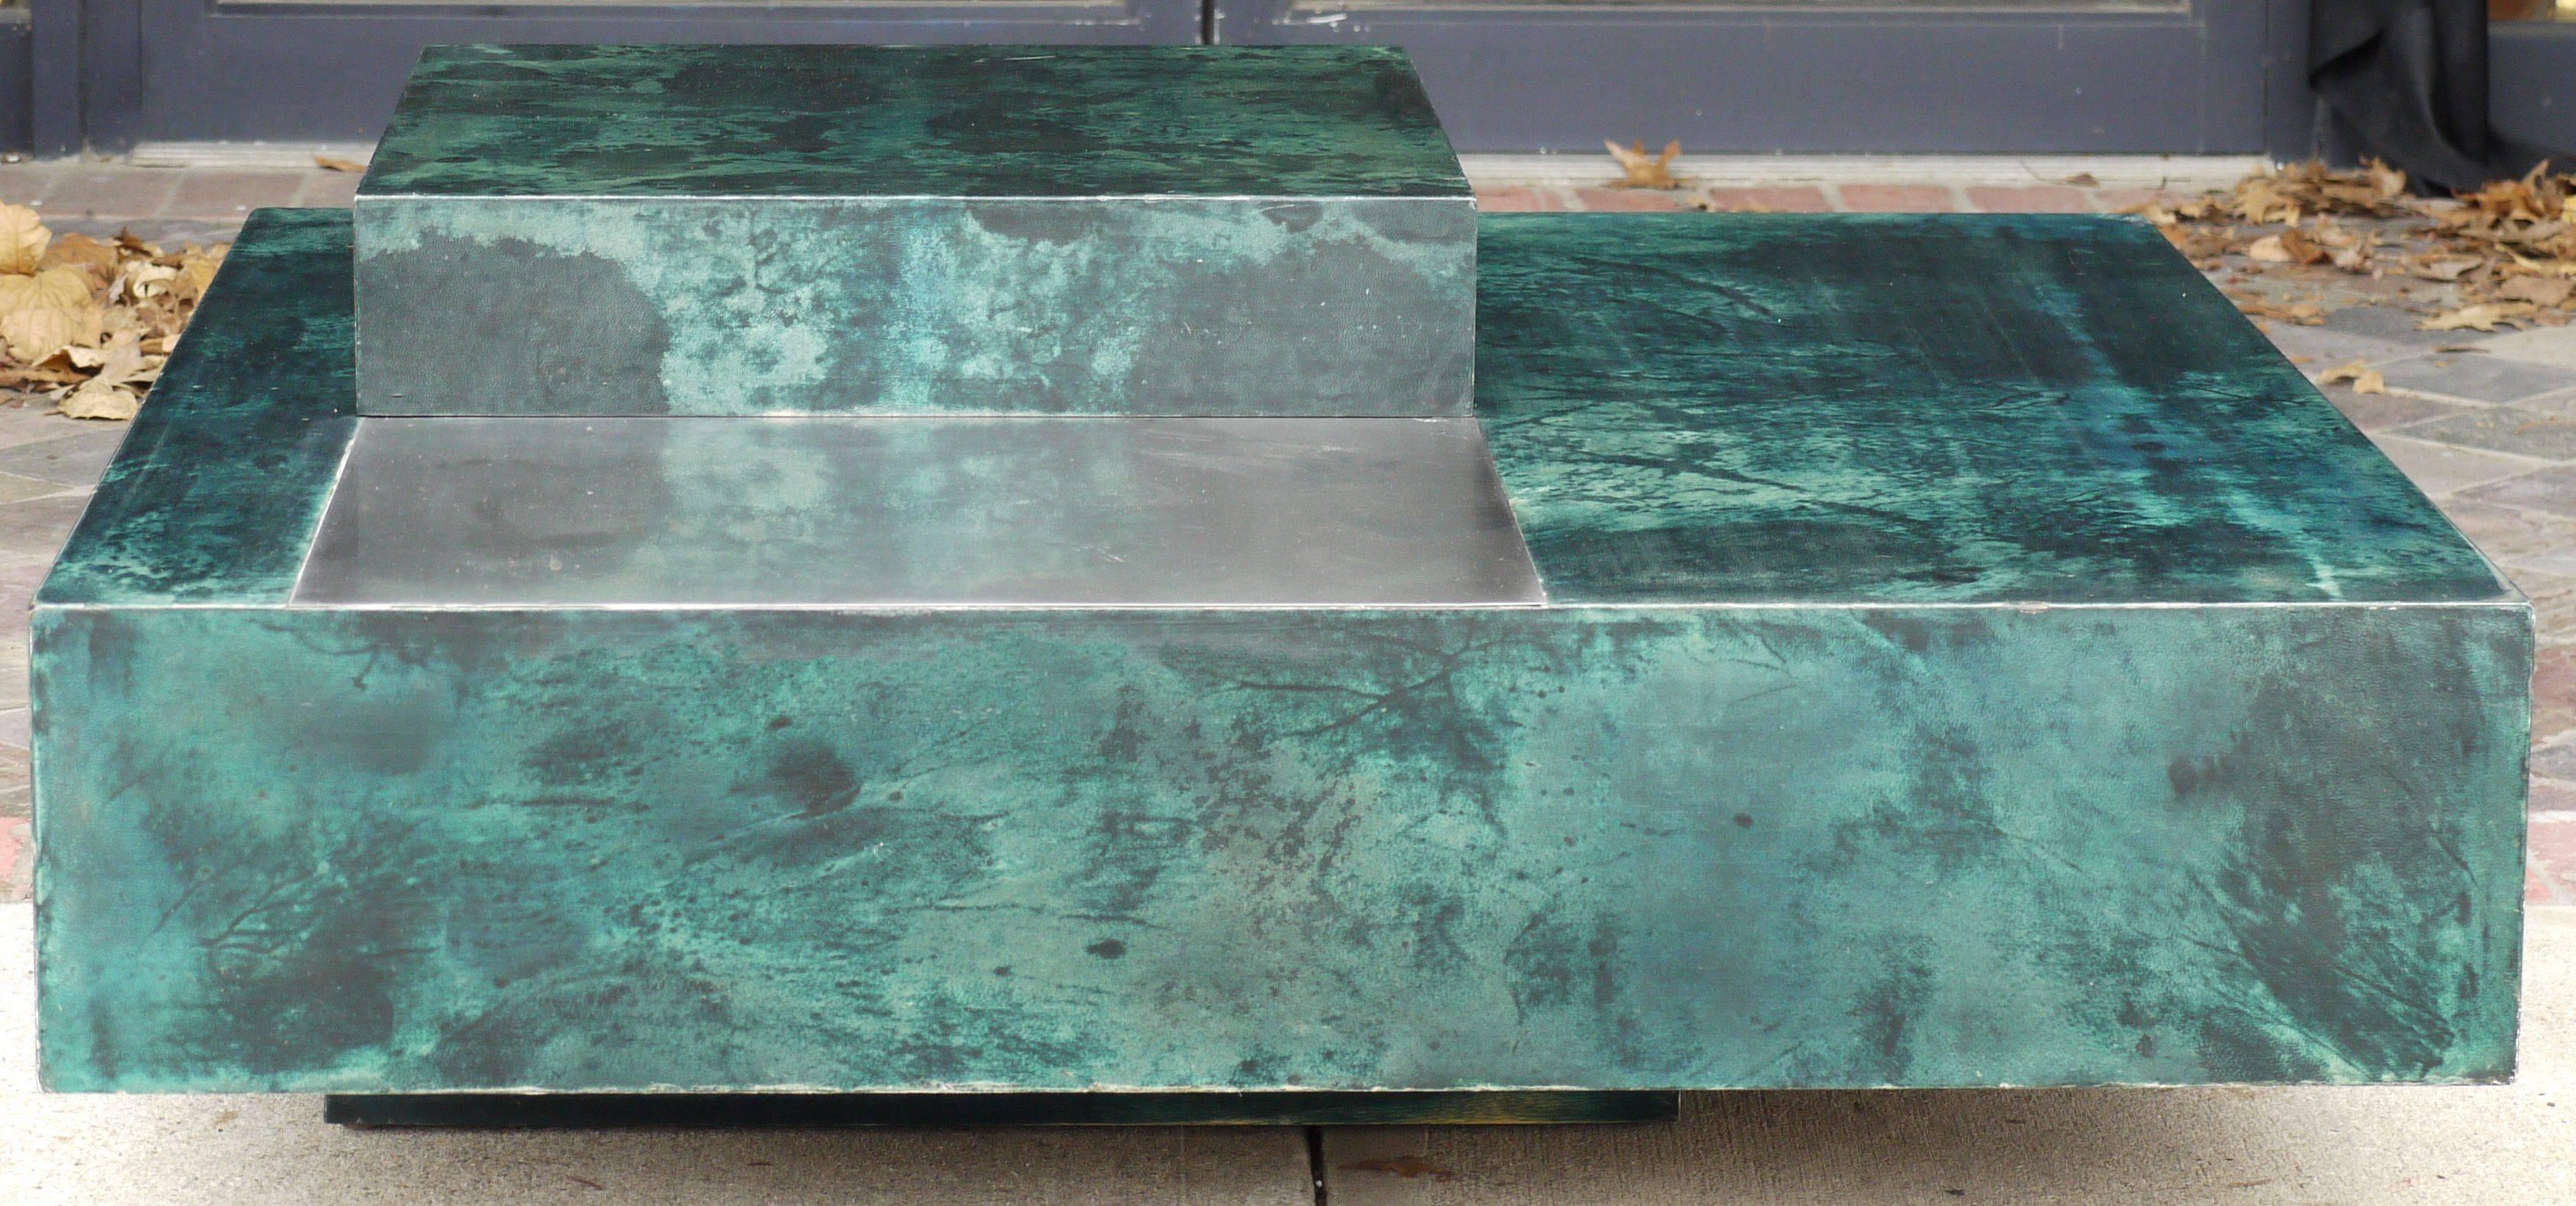 Absolutely stunning Aldo Tura square coffee table in emerald green dyed goatskin parchment with a polished lacquer finish, the table height is: 12